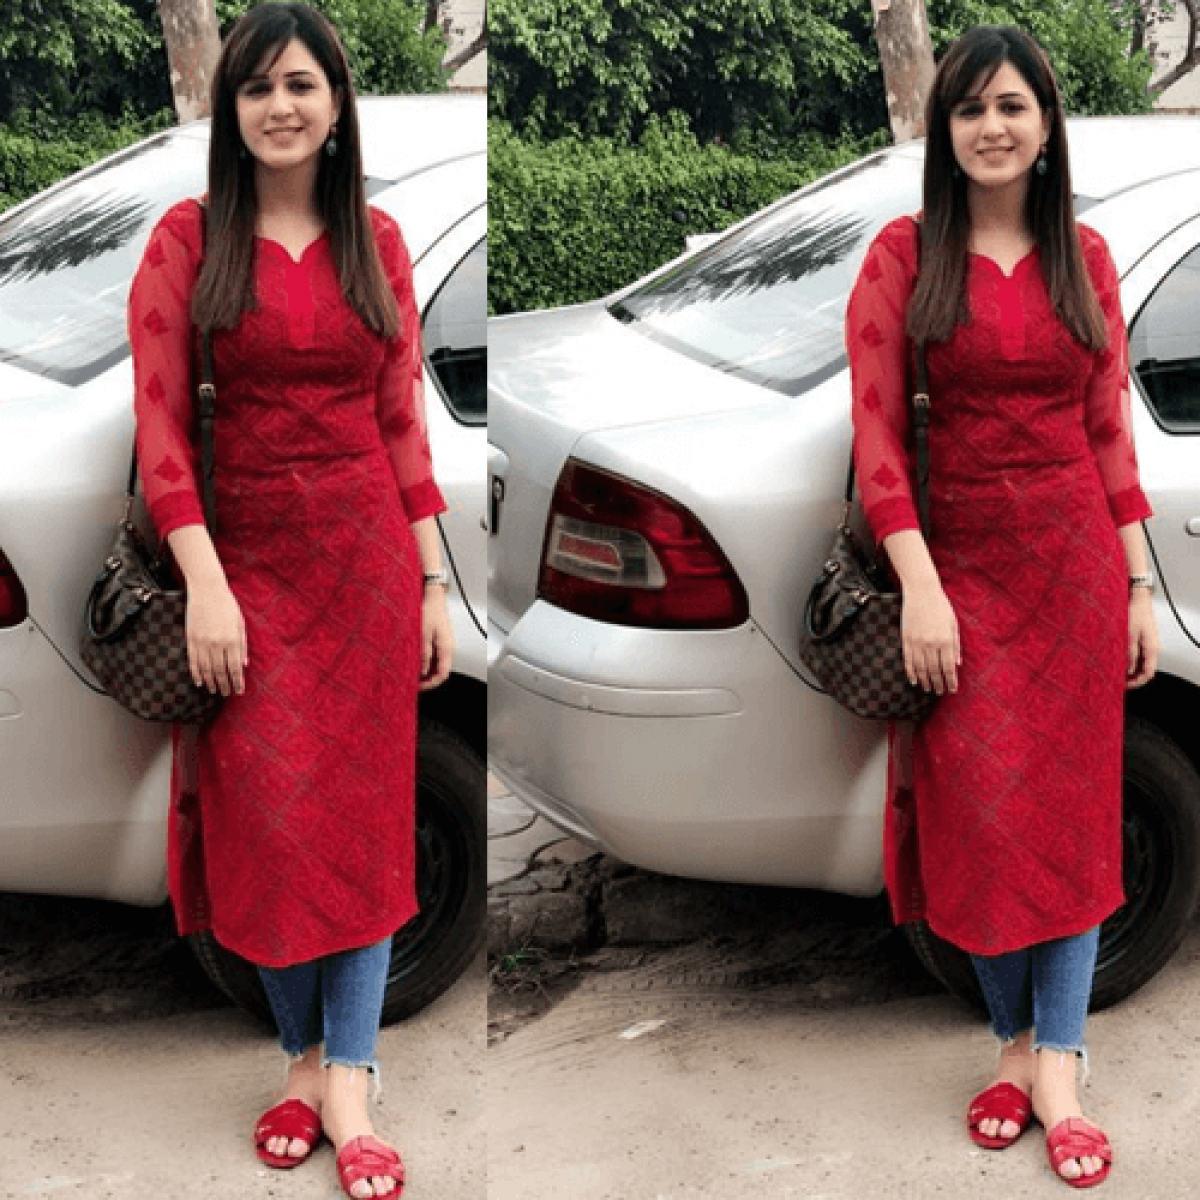 Three Types Of Kurtis To Pair With Jeans | IWMBuzz